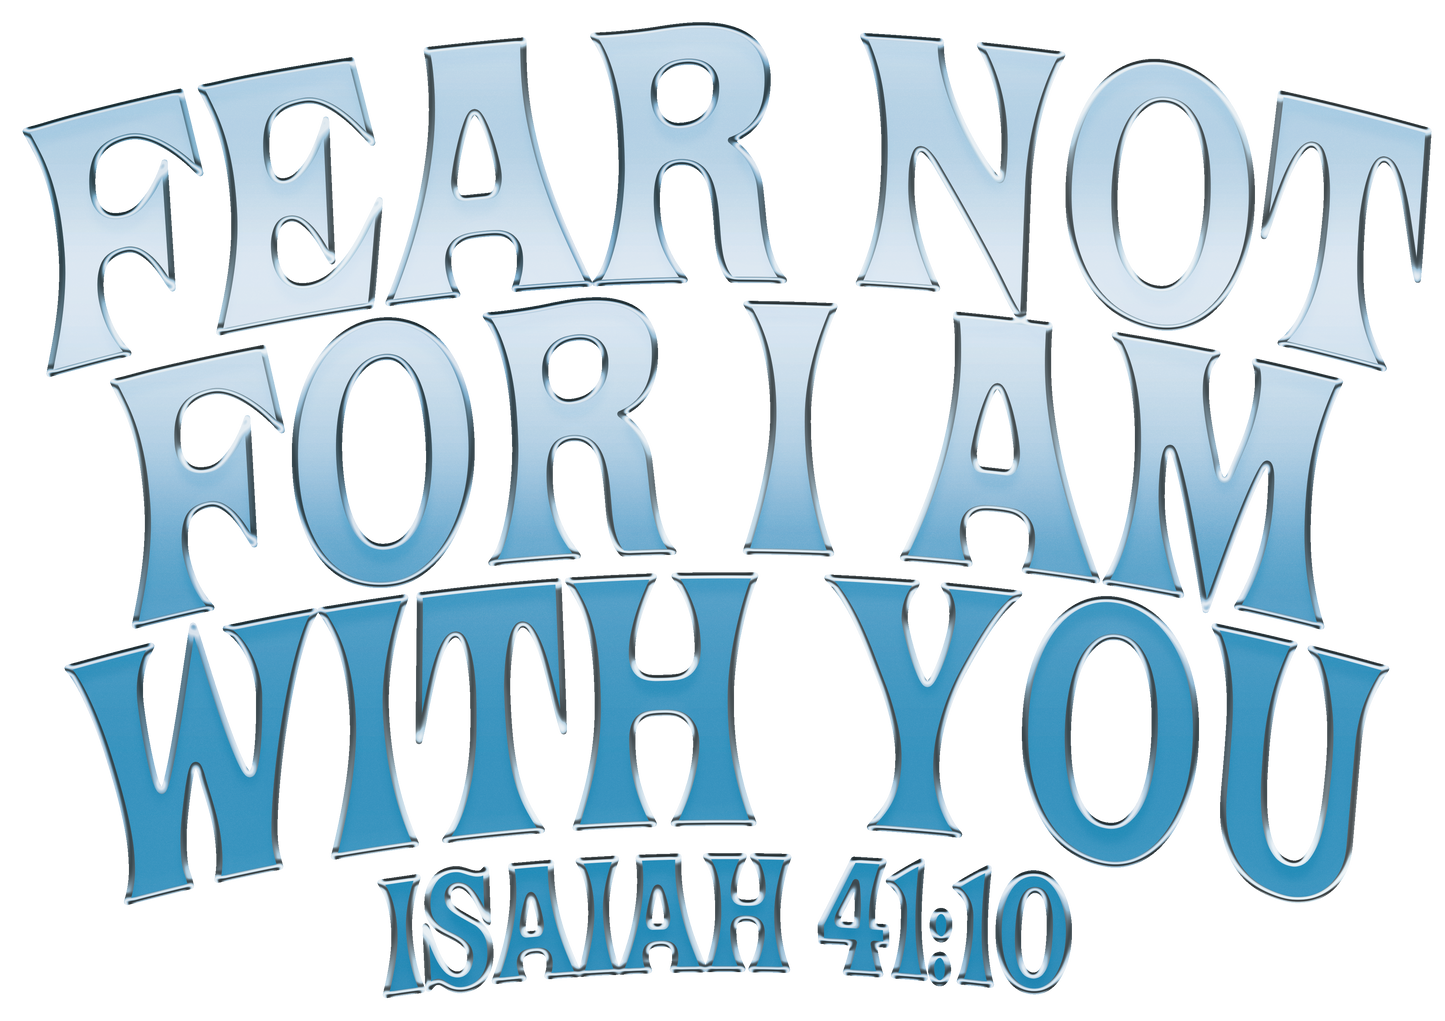 ISAIAH 41:10 Fear Not For I Am With You